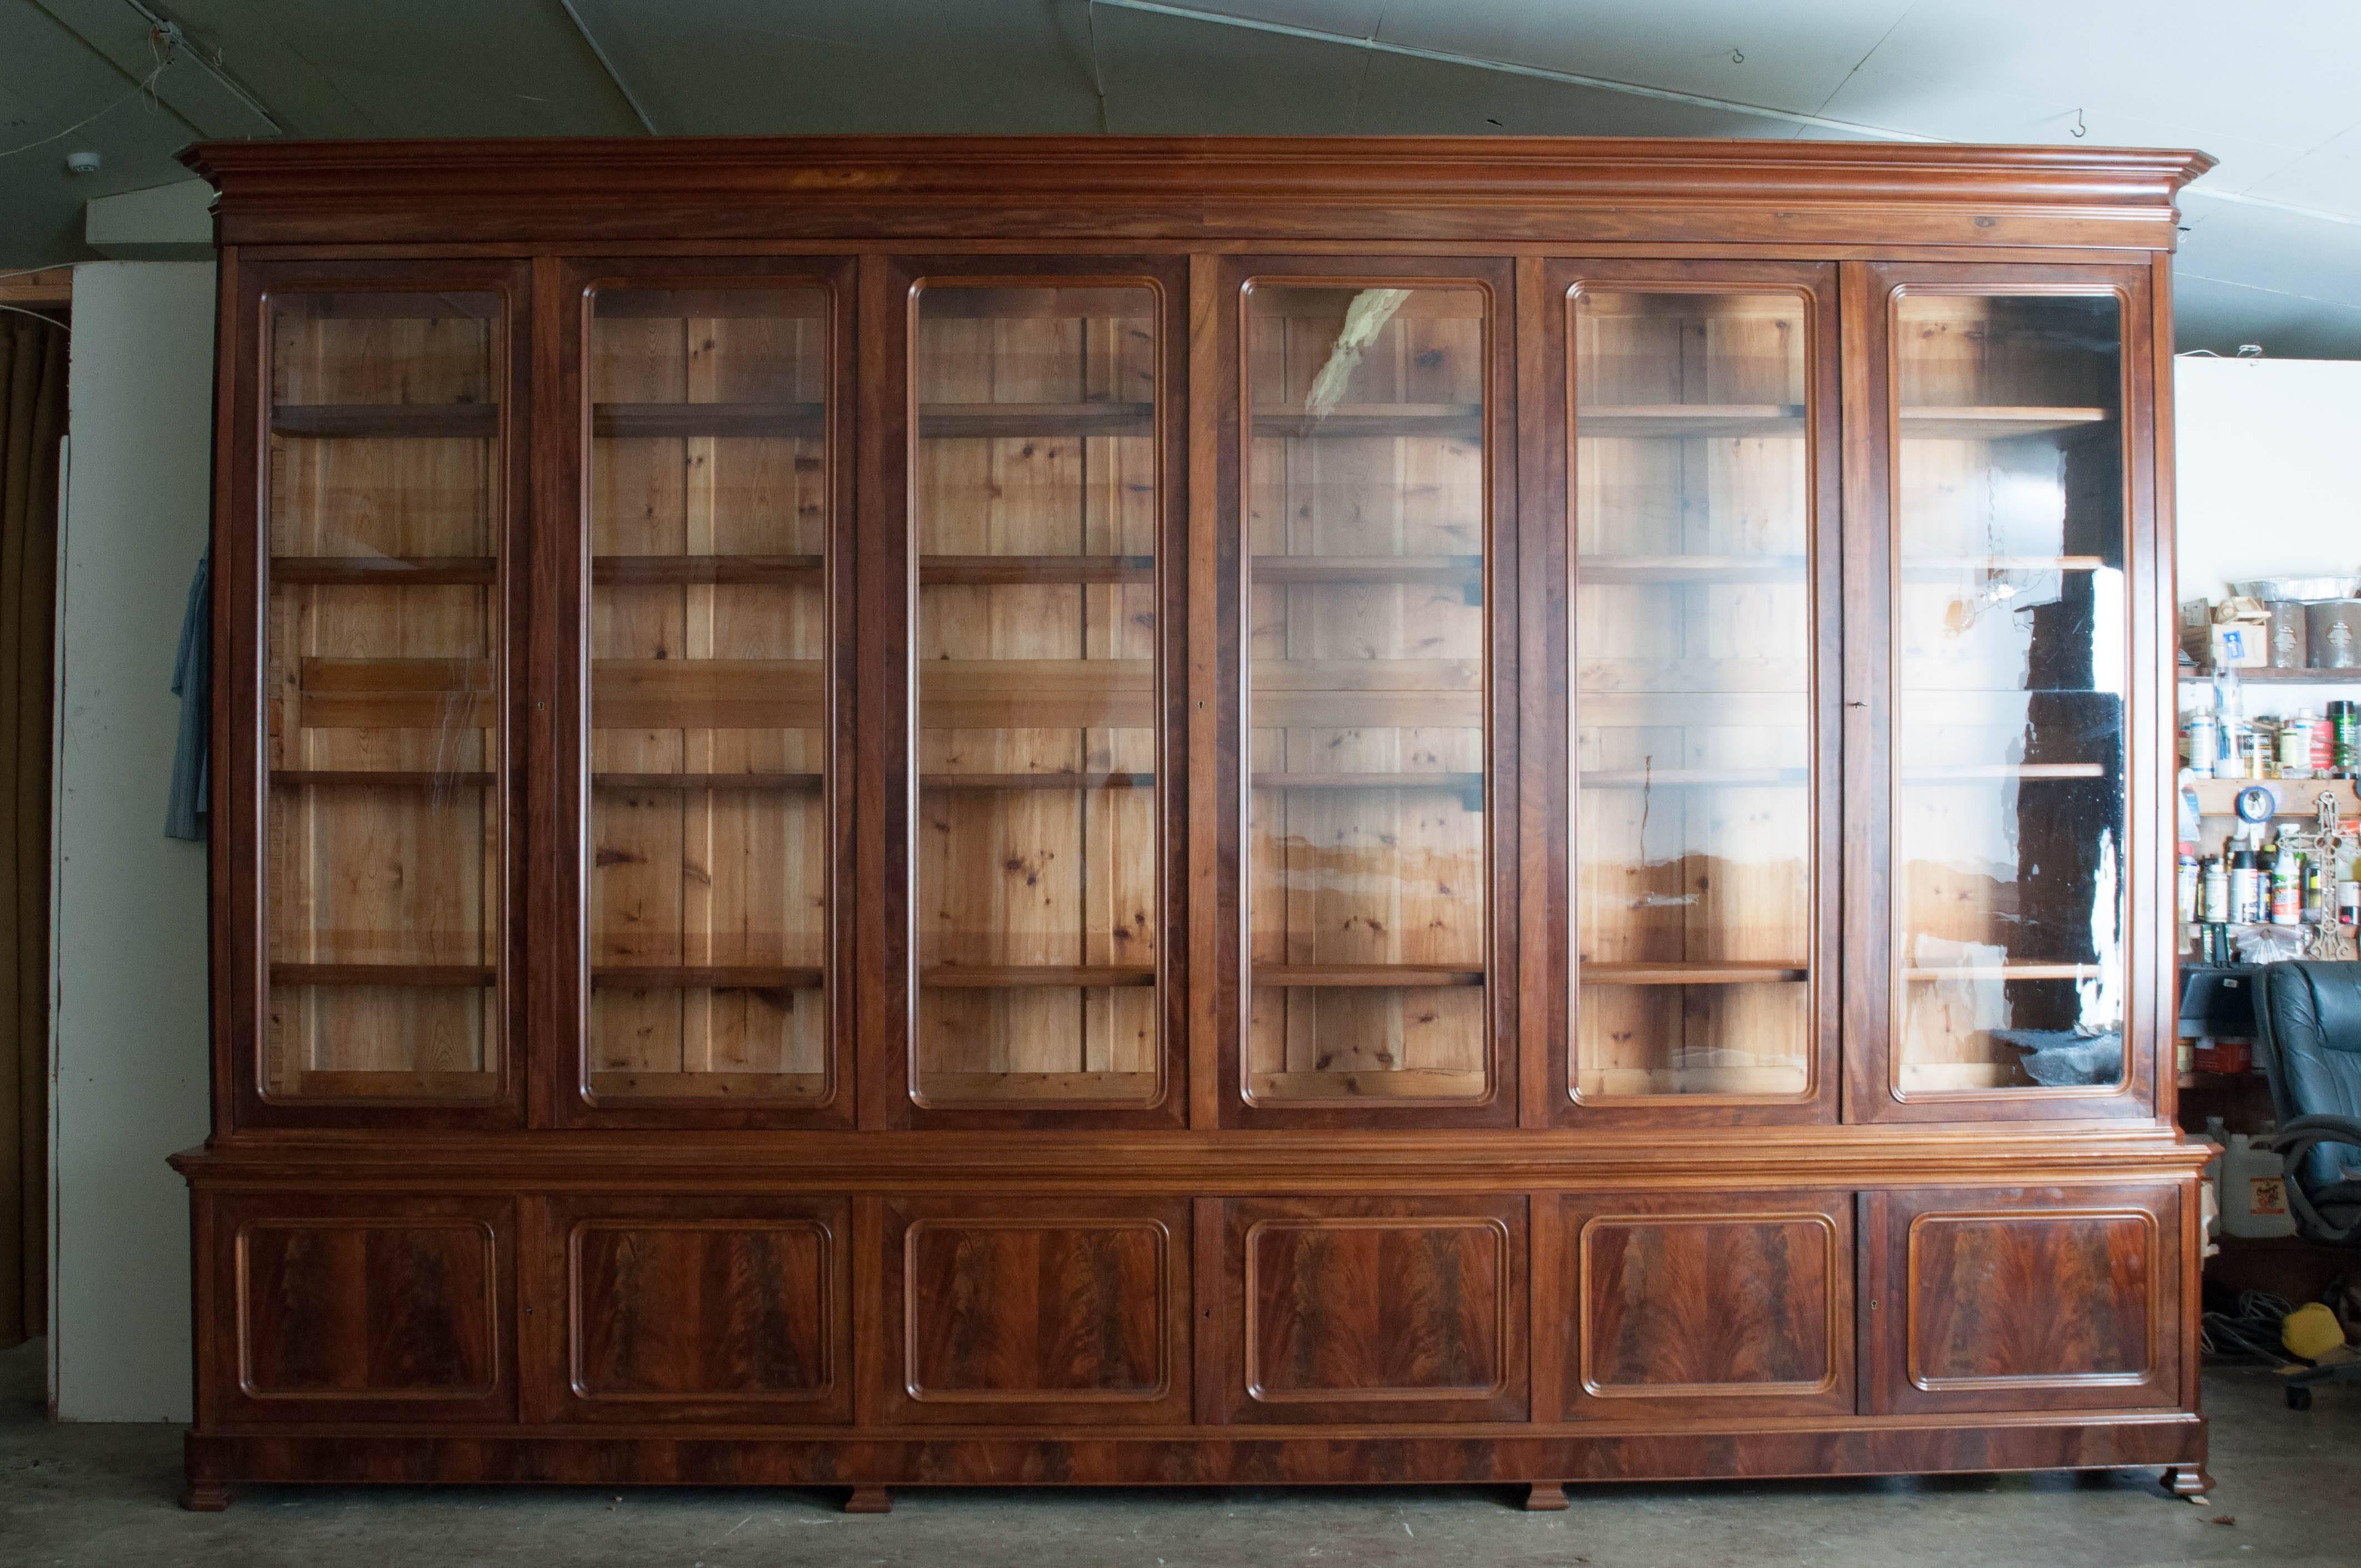 An outstanding large-scale grand bibliotheque in excellent condition. The bookcase stands over 9 feet tall and is over 14 feet long. The top and base do come apart, however, the base and crown remain one long, solid piece. Beautifully figured